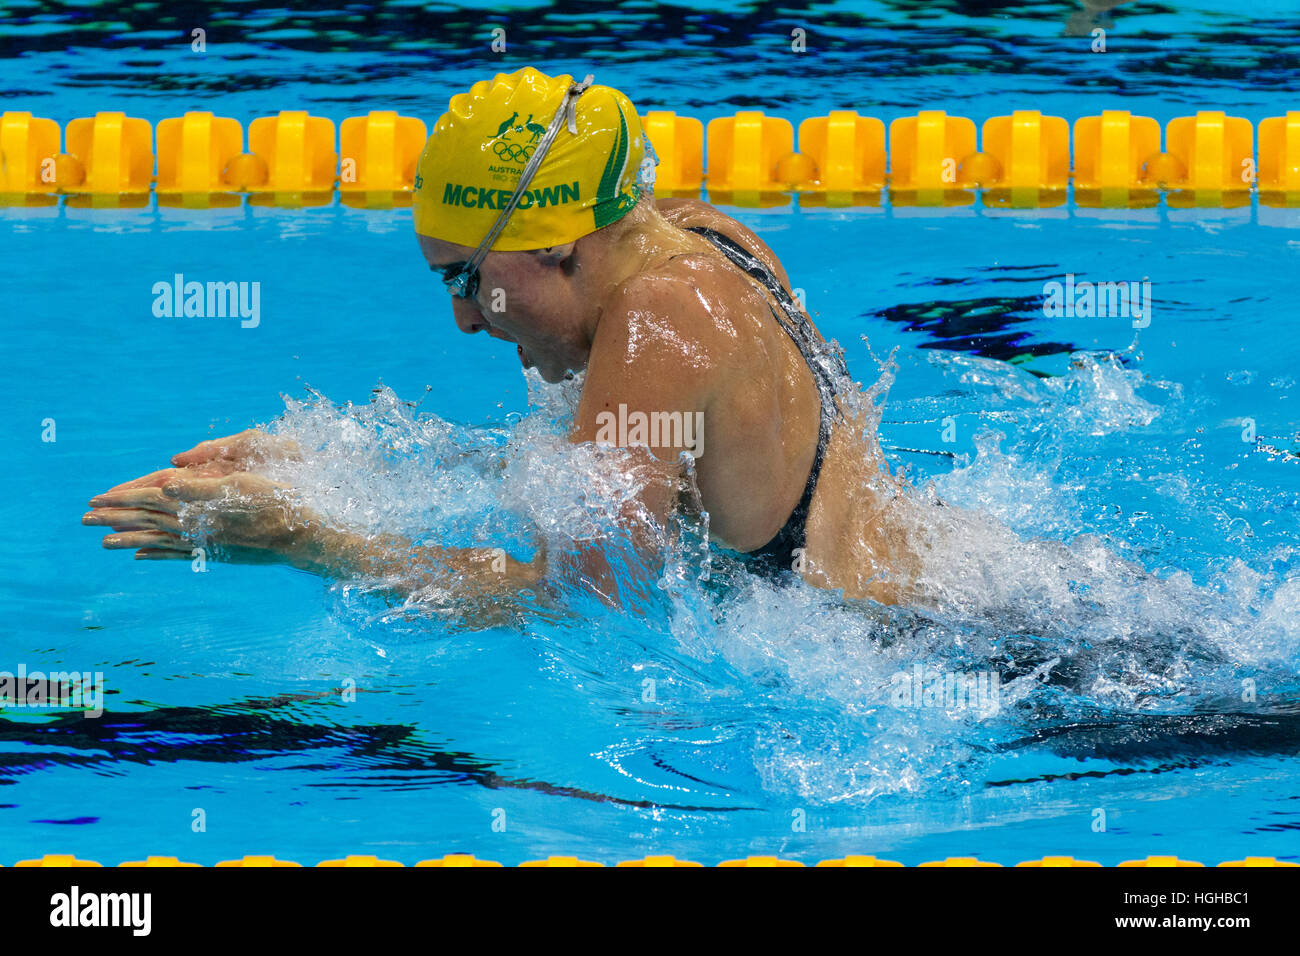 Rio de Janeiro, Brazil. 11 August 2016.  Emma McKeo (AUS) competing in the women's 200m breaststroke final at the 2016 Olympic S Stock Photo